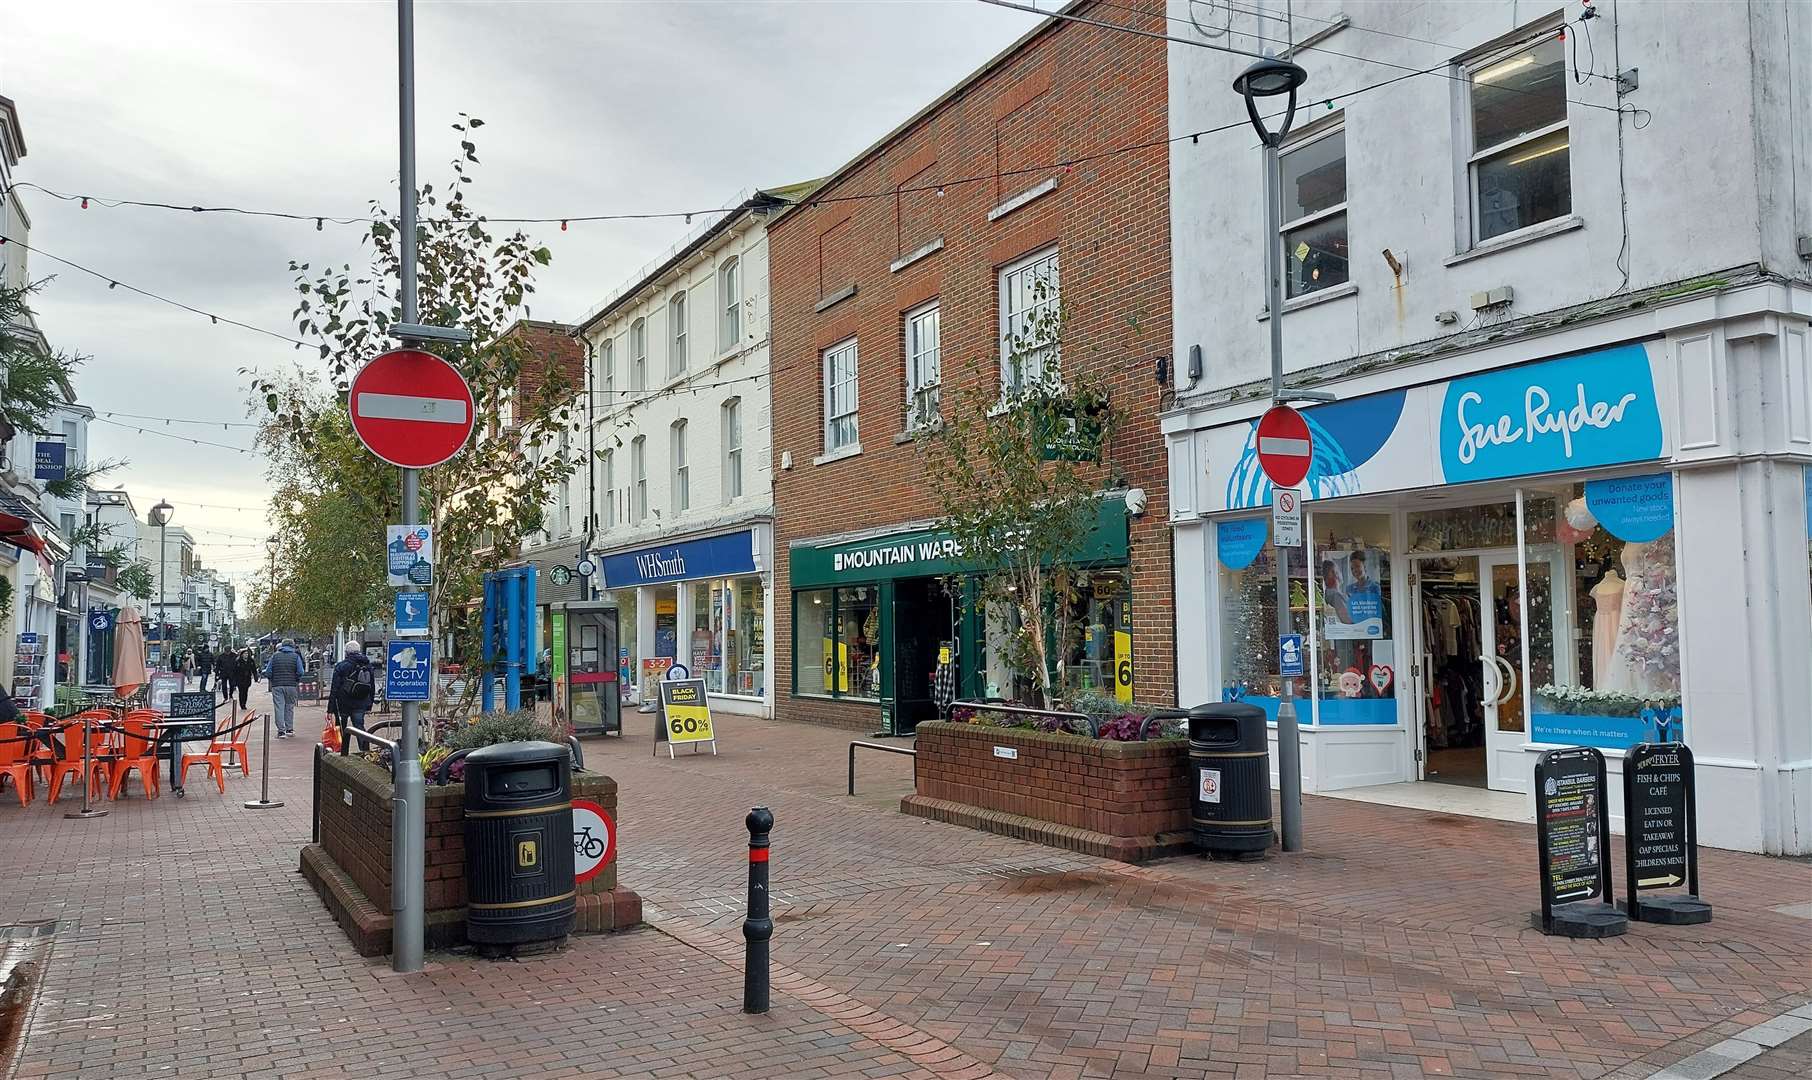 Parts of Deal high street are already permanently pedestrianised